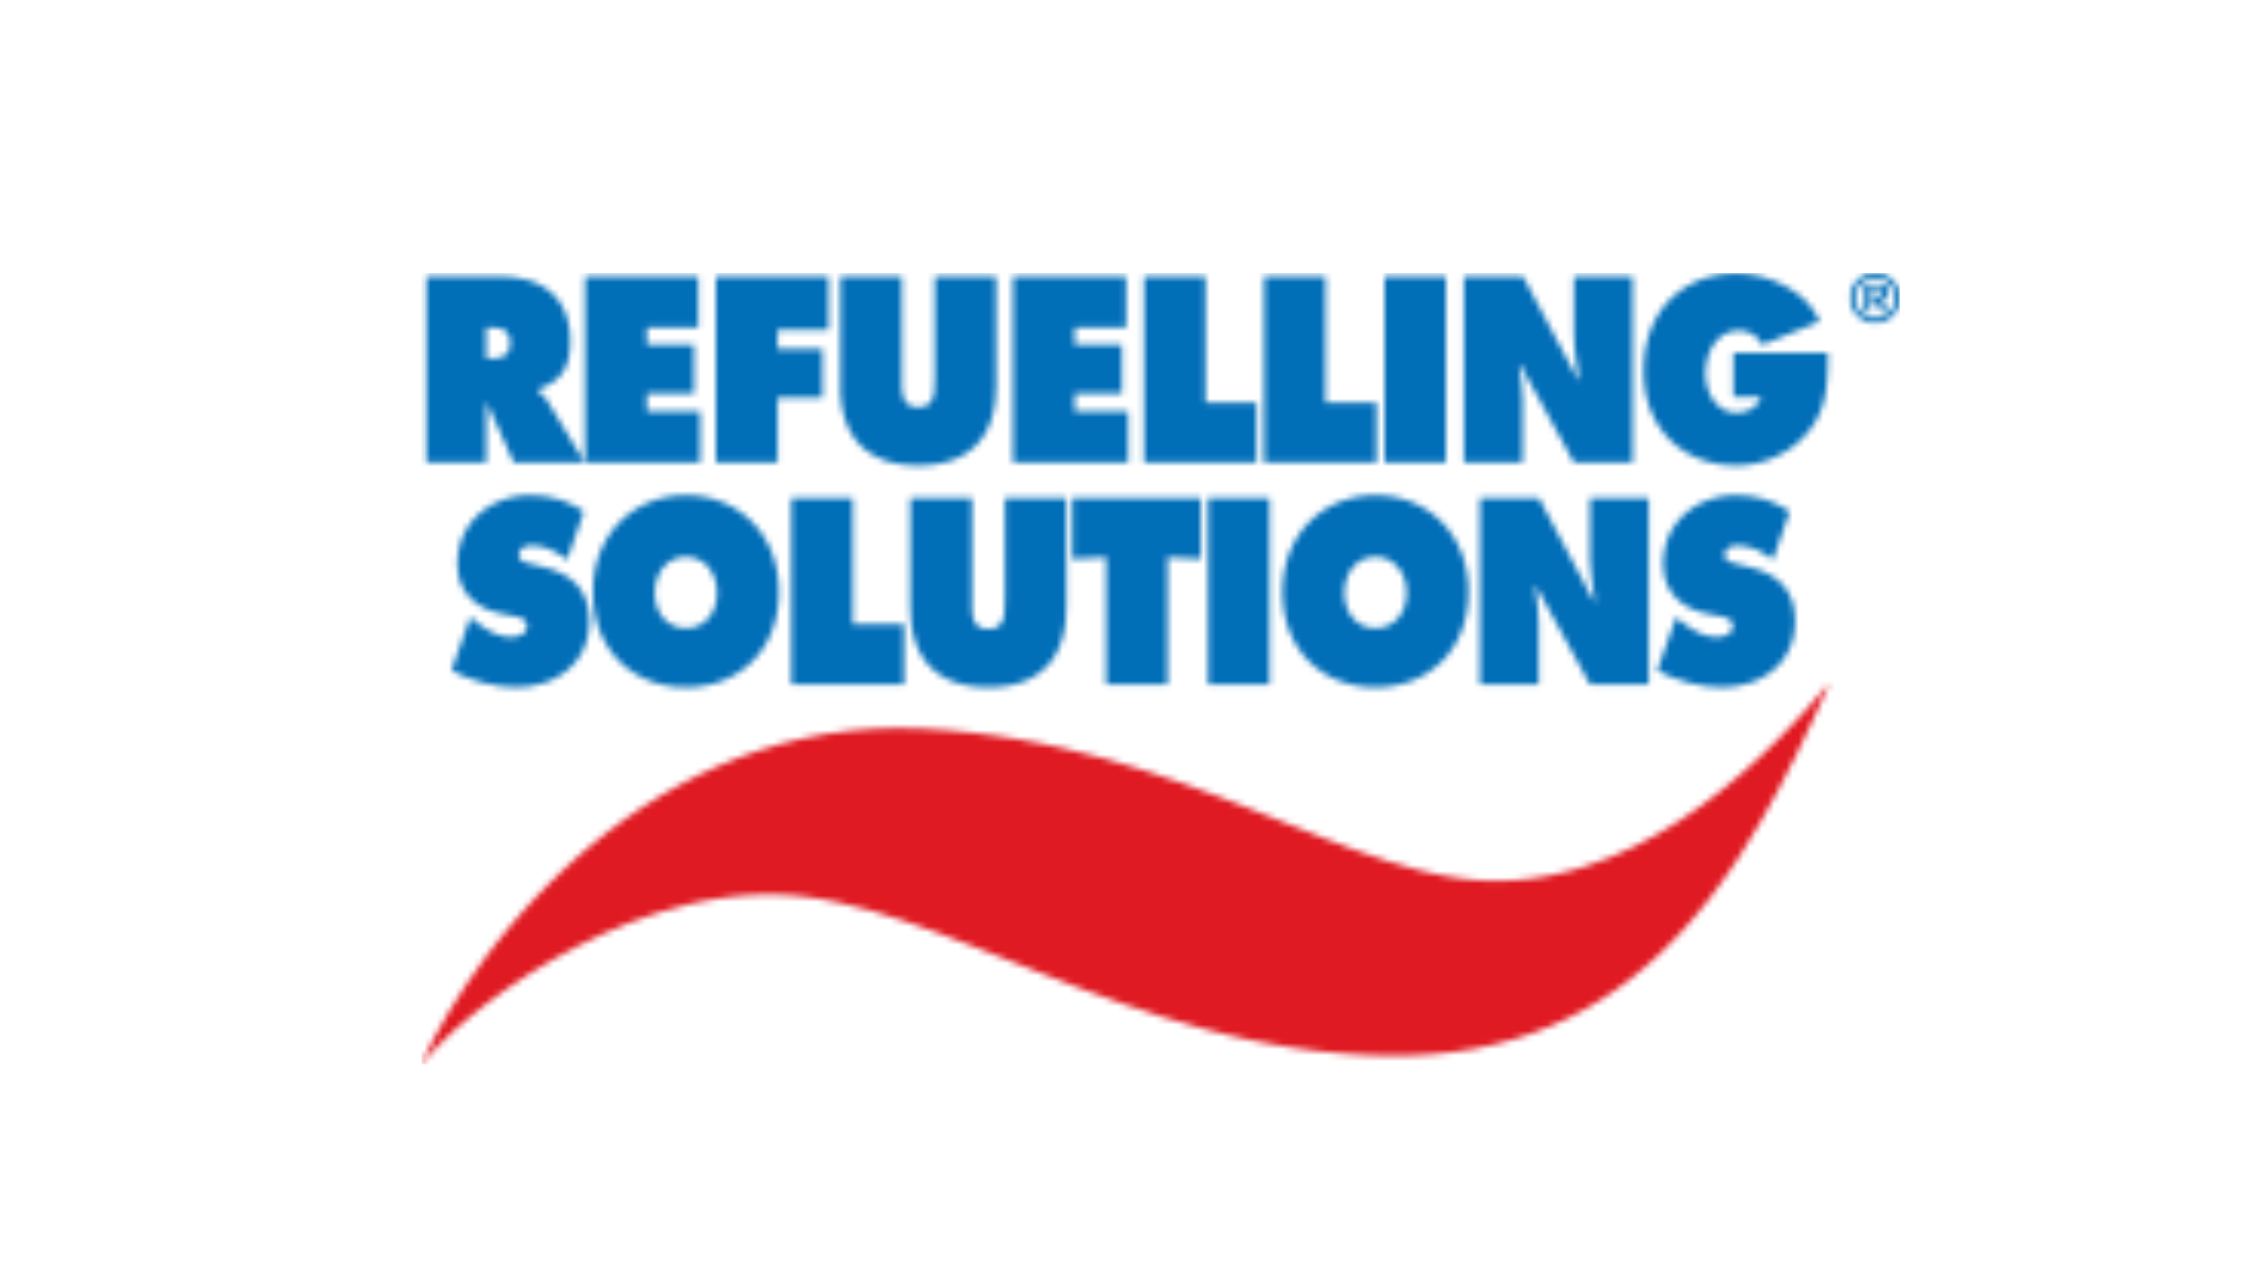 Refuelling Solutions (Screen)